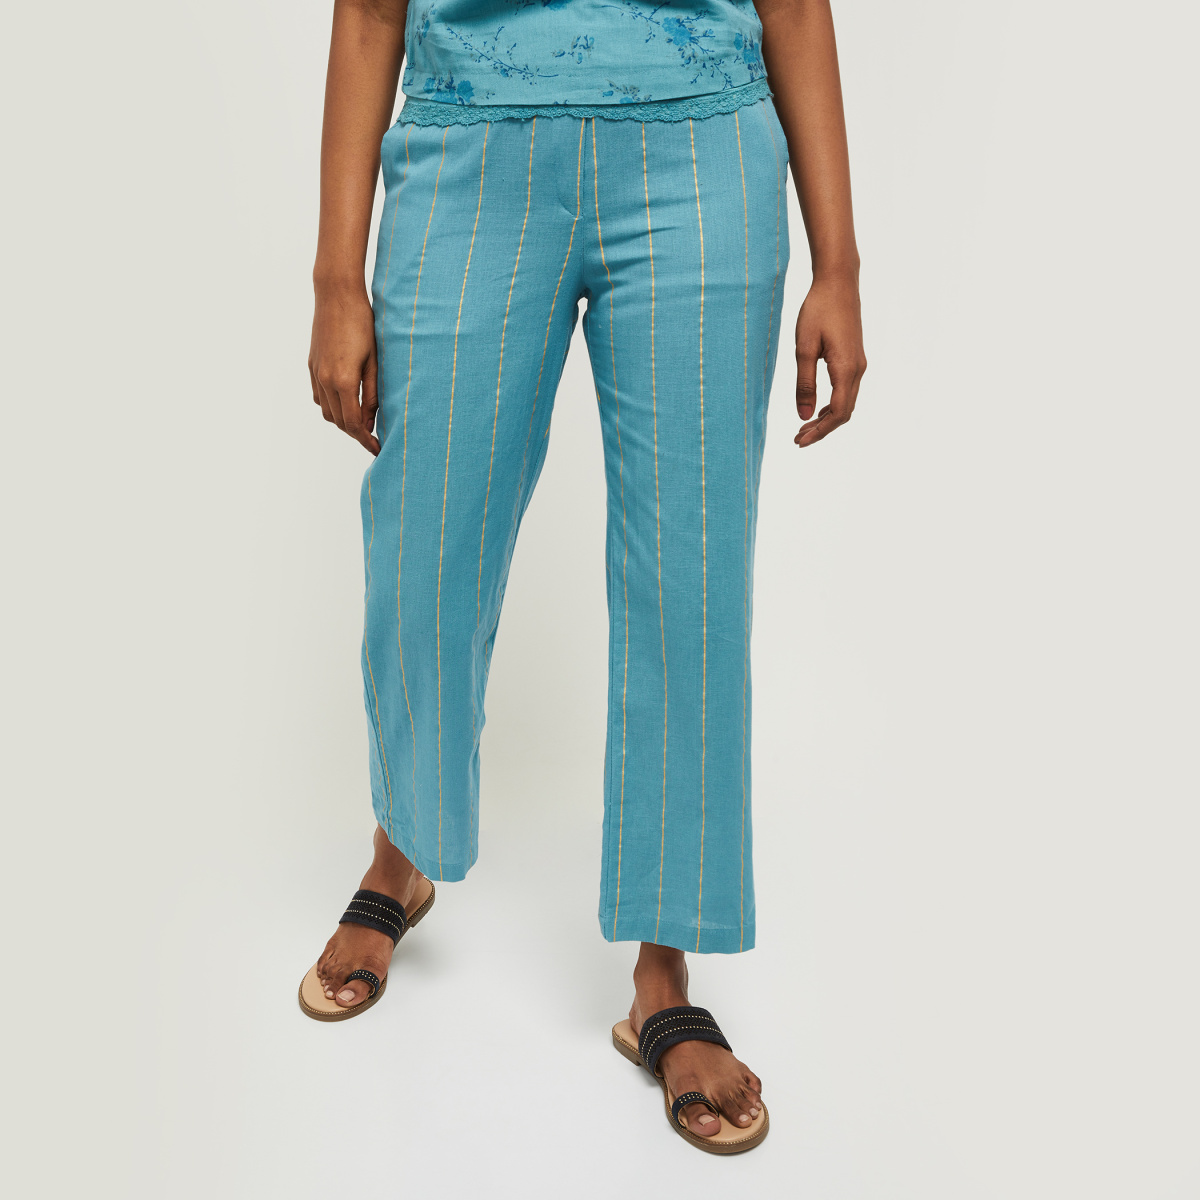 Buy Grey And Pink Printed Stripe Cotton Straight Pants With A Narrow  Printed Border At The Hem by Designer KORA for Women online at  Ogaanmarketcom